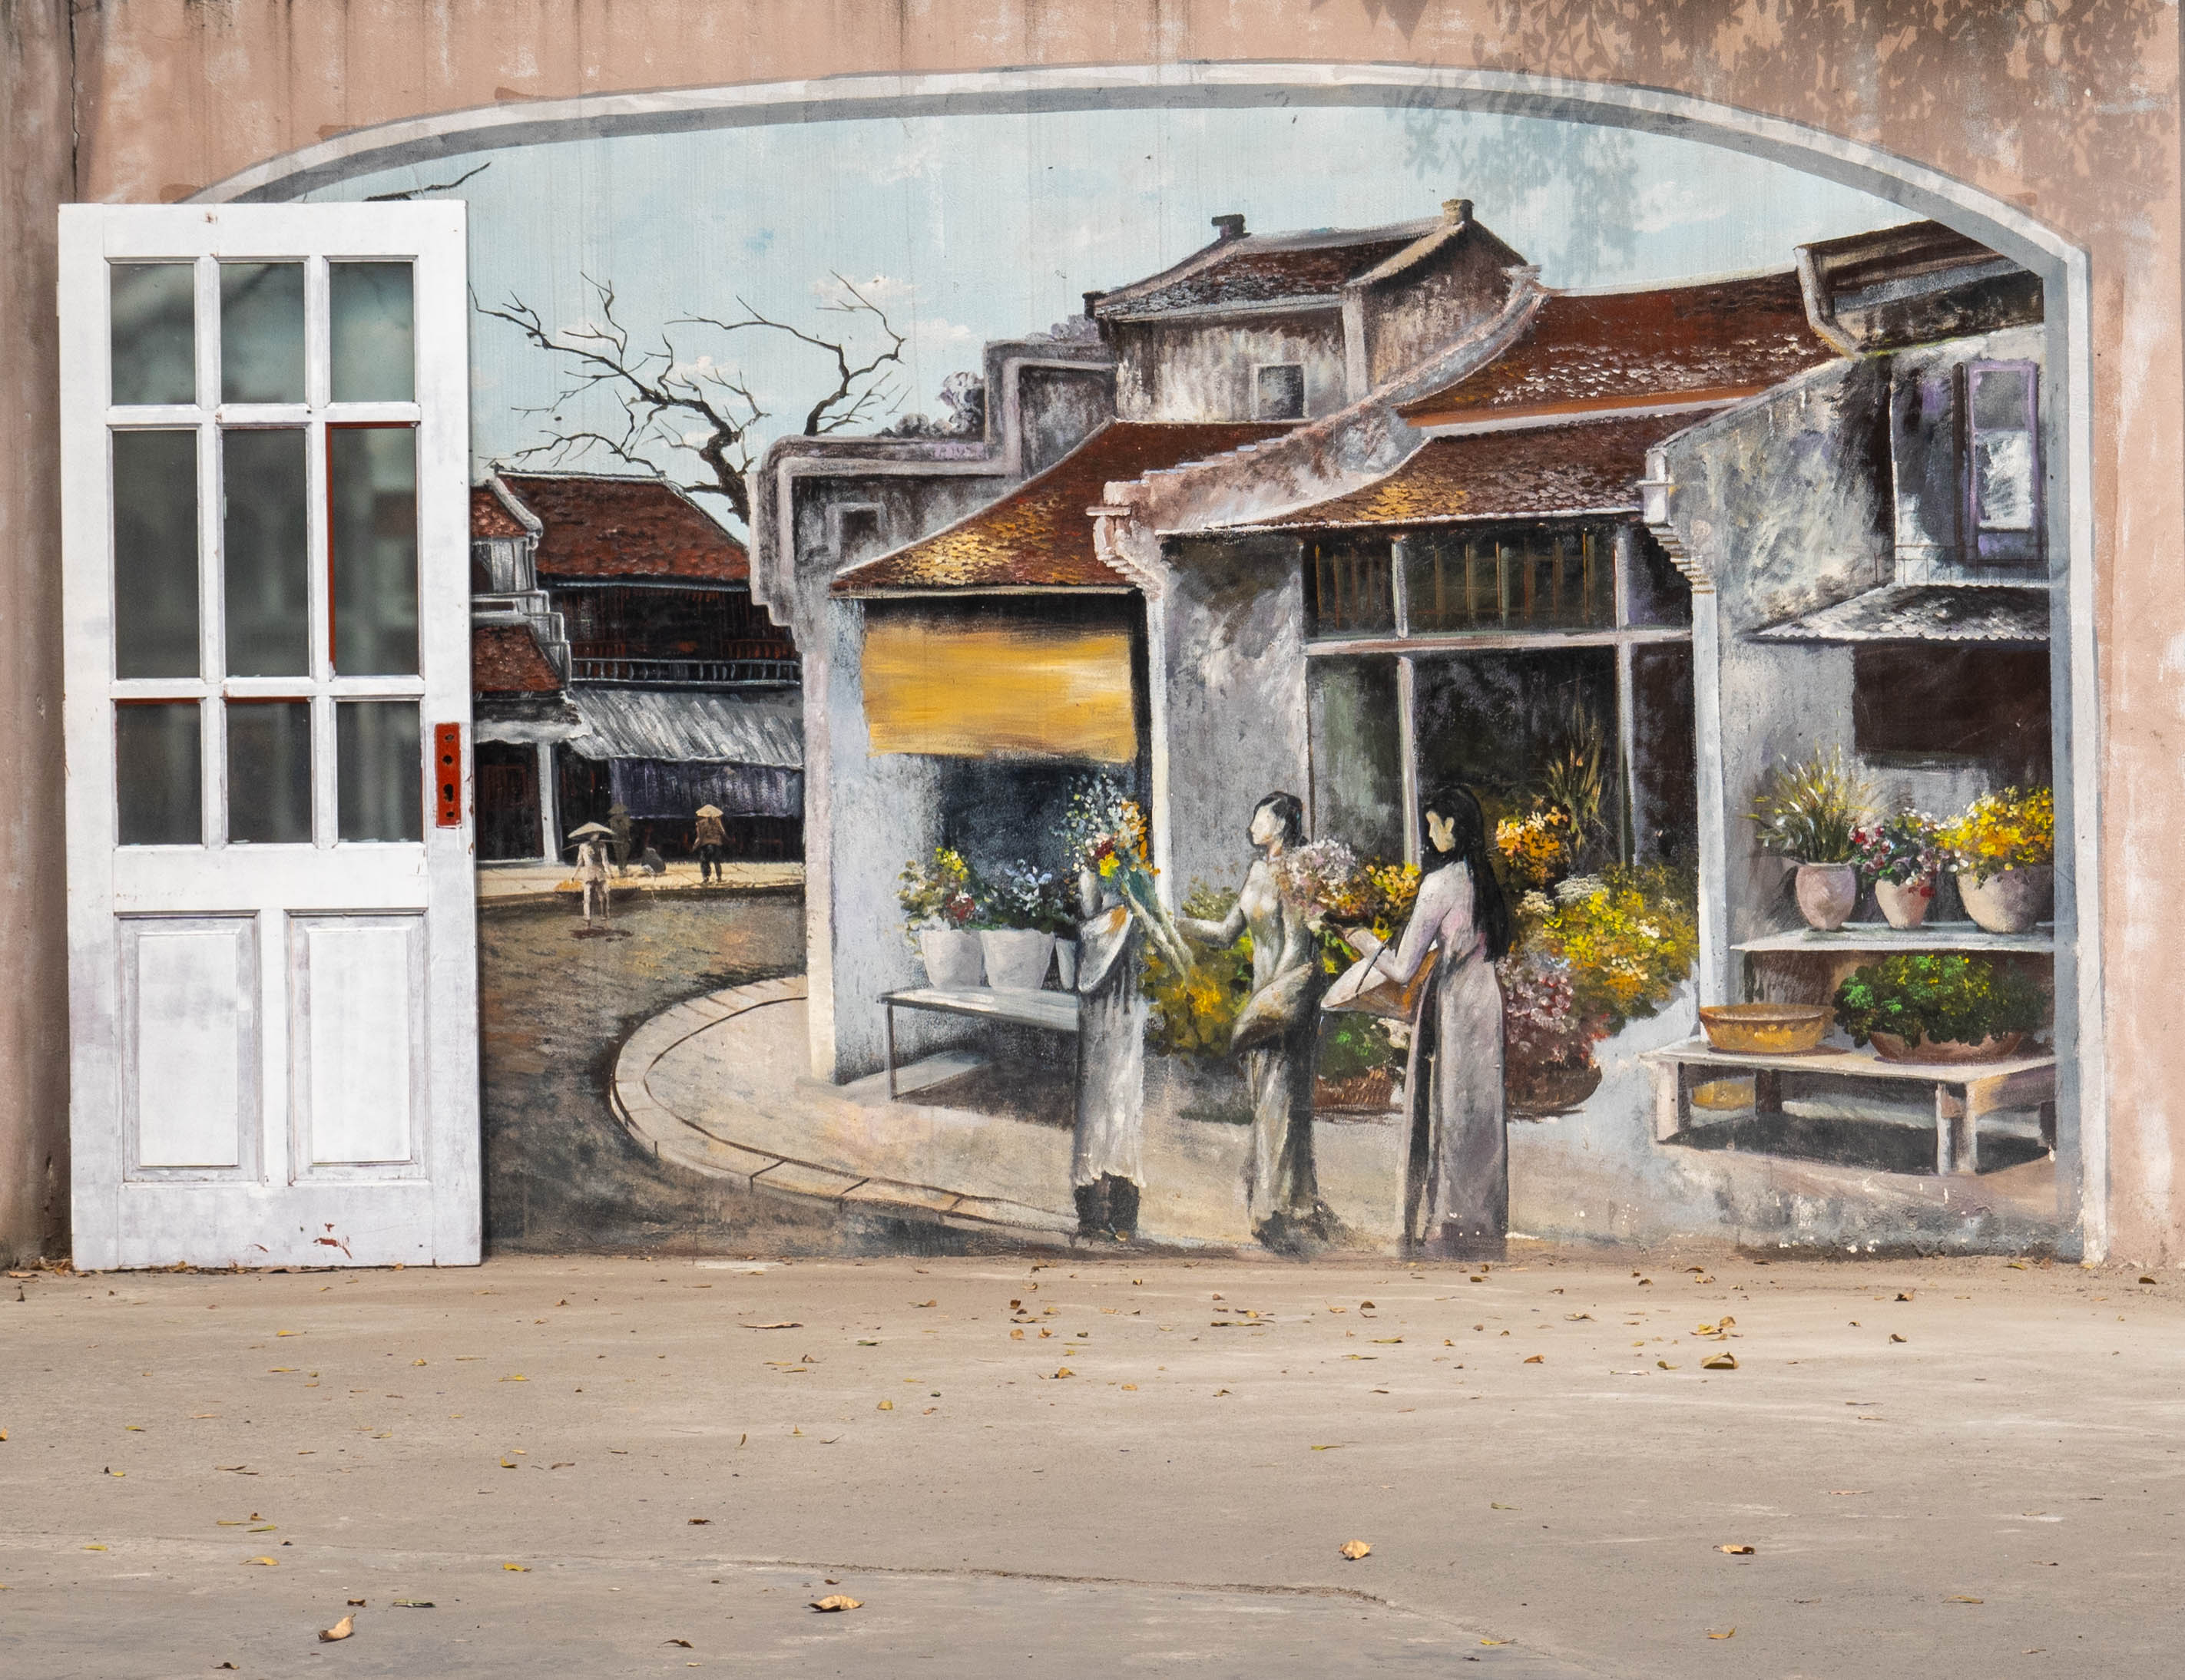 mural on wall showing a street corner with two ladies dressed in traditional Áo dài. On the left side of picture there is a door leaning against the wall.